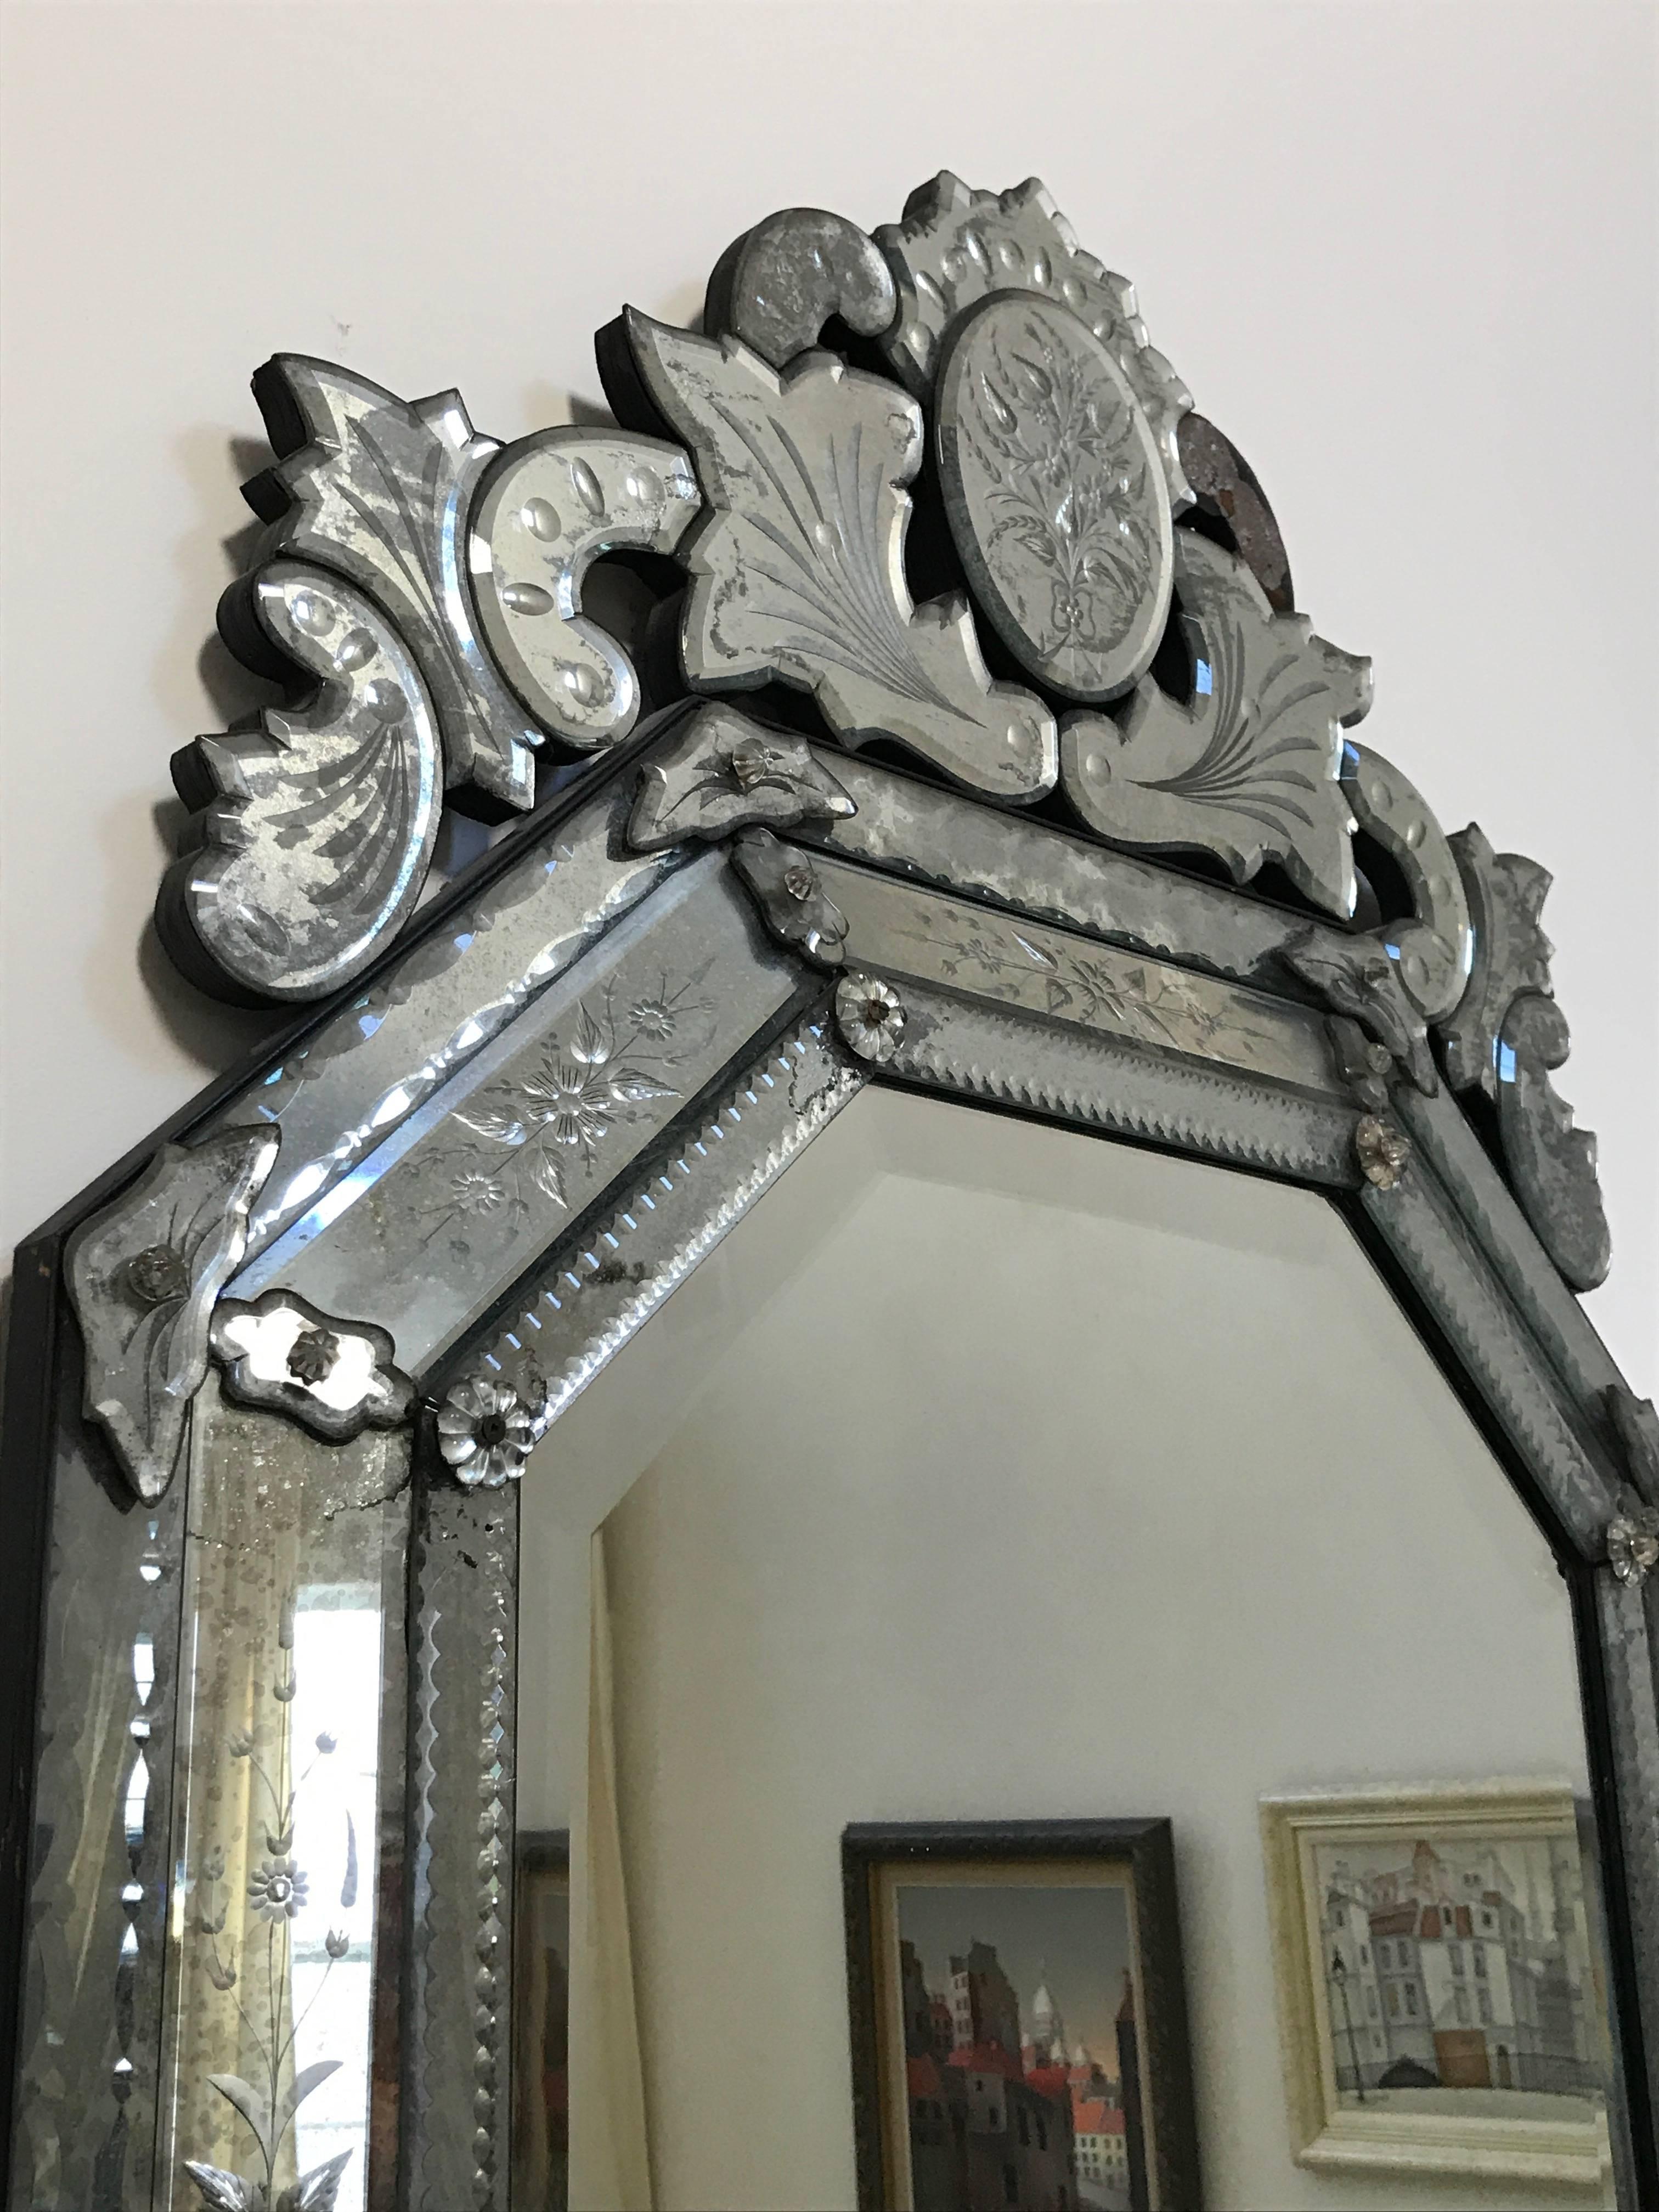 Large fancy Venetian mirror with an octagonal shape, etching around the periphery, and wonderful decoration on top.